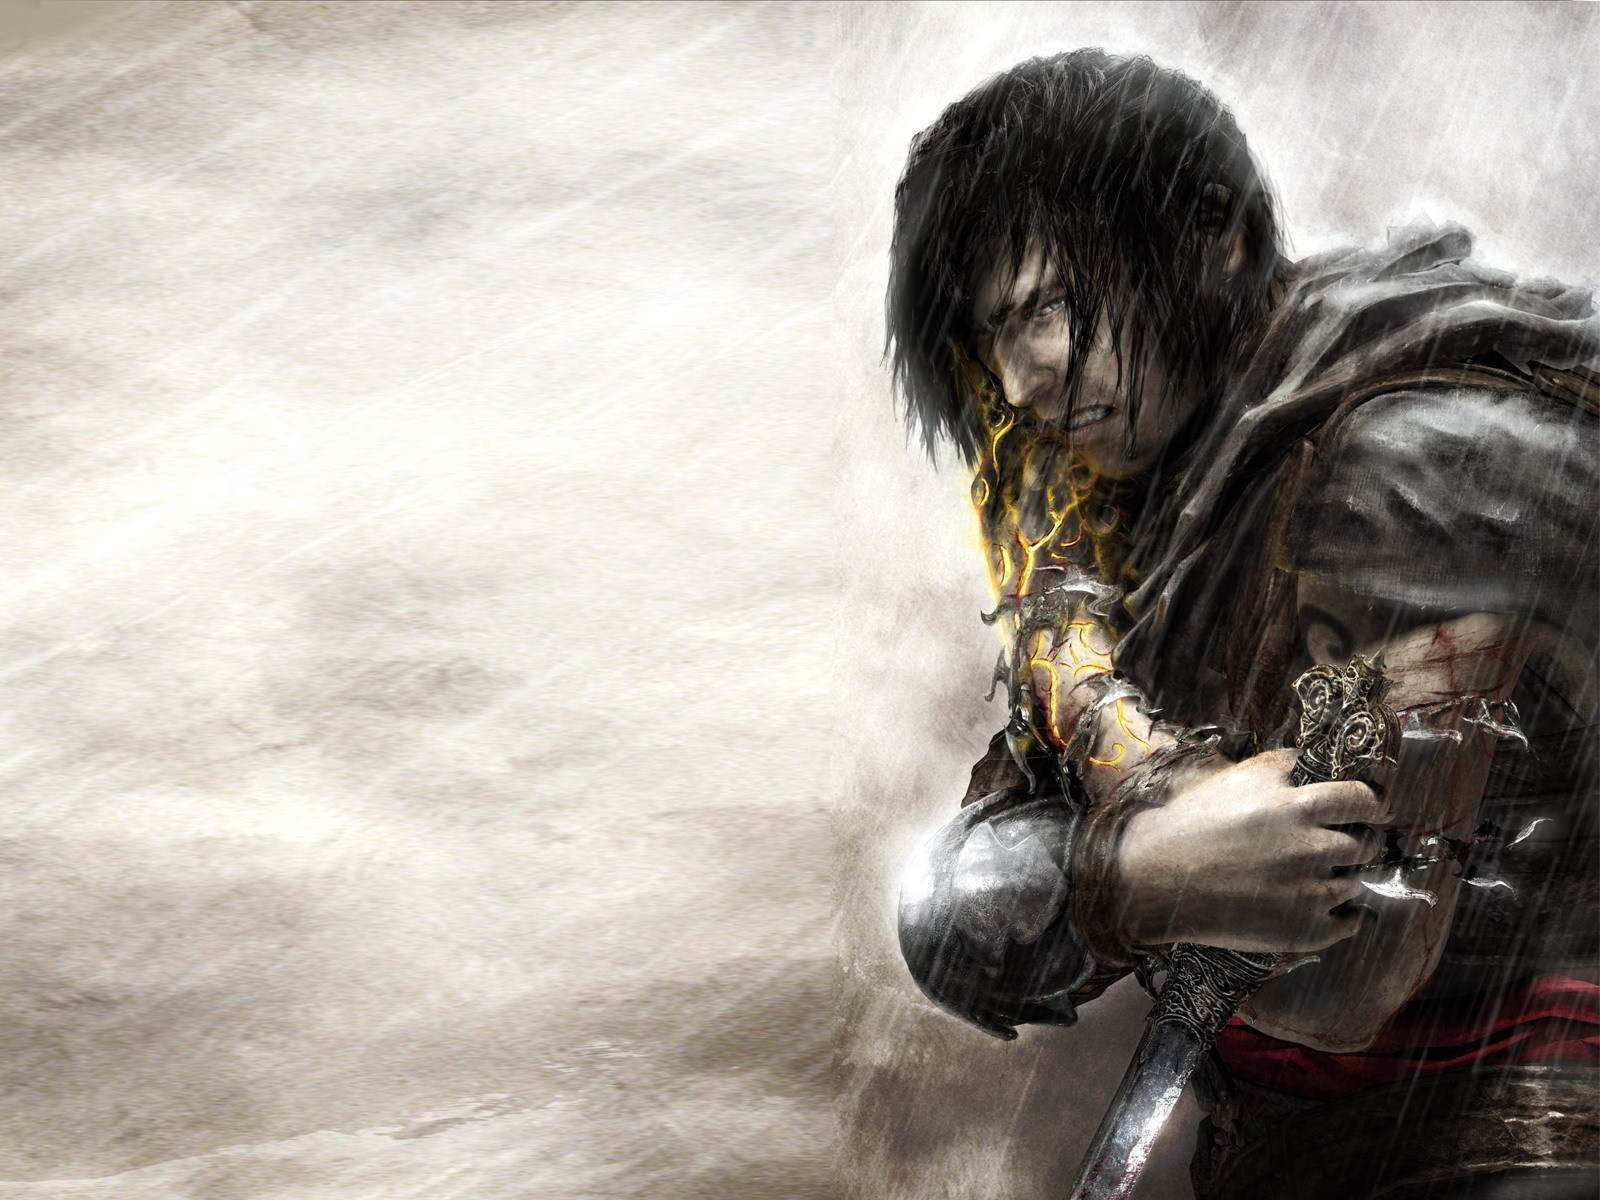 Popular Prince Of Persia images for mobile phone